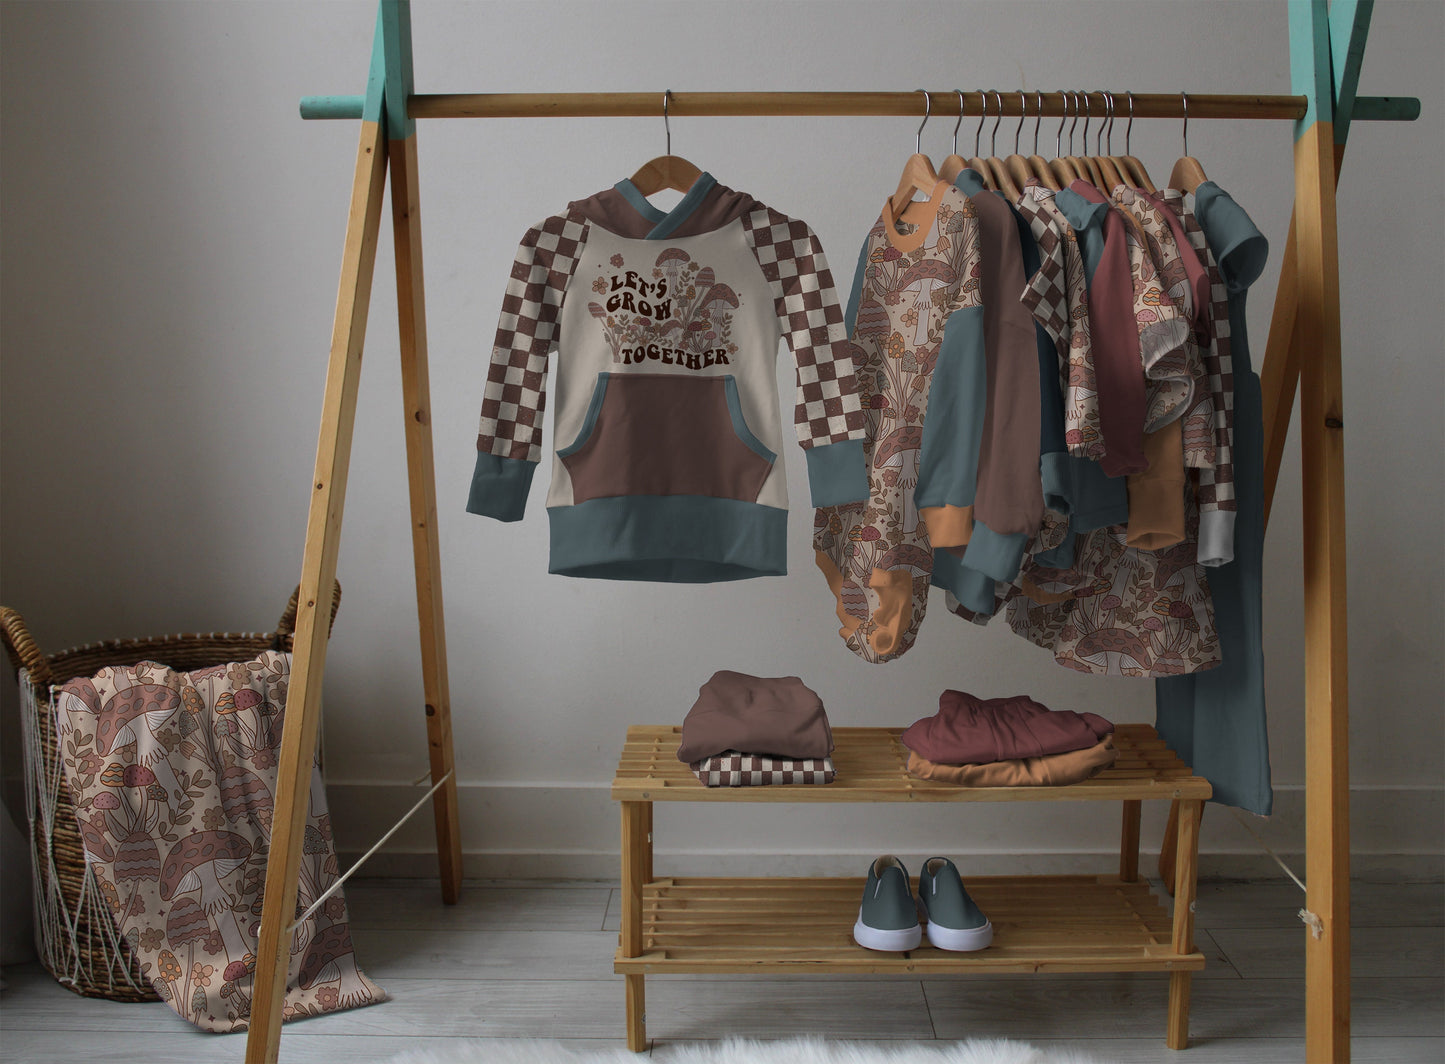 Clothing Rack Hanging Clothes Display Mockup, Lowland Kids Capsule Collection, Realistic Clothing Mock Up for Photoshop and Procreate